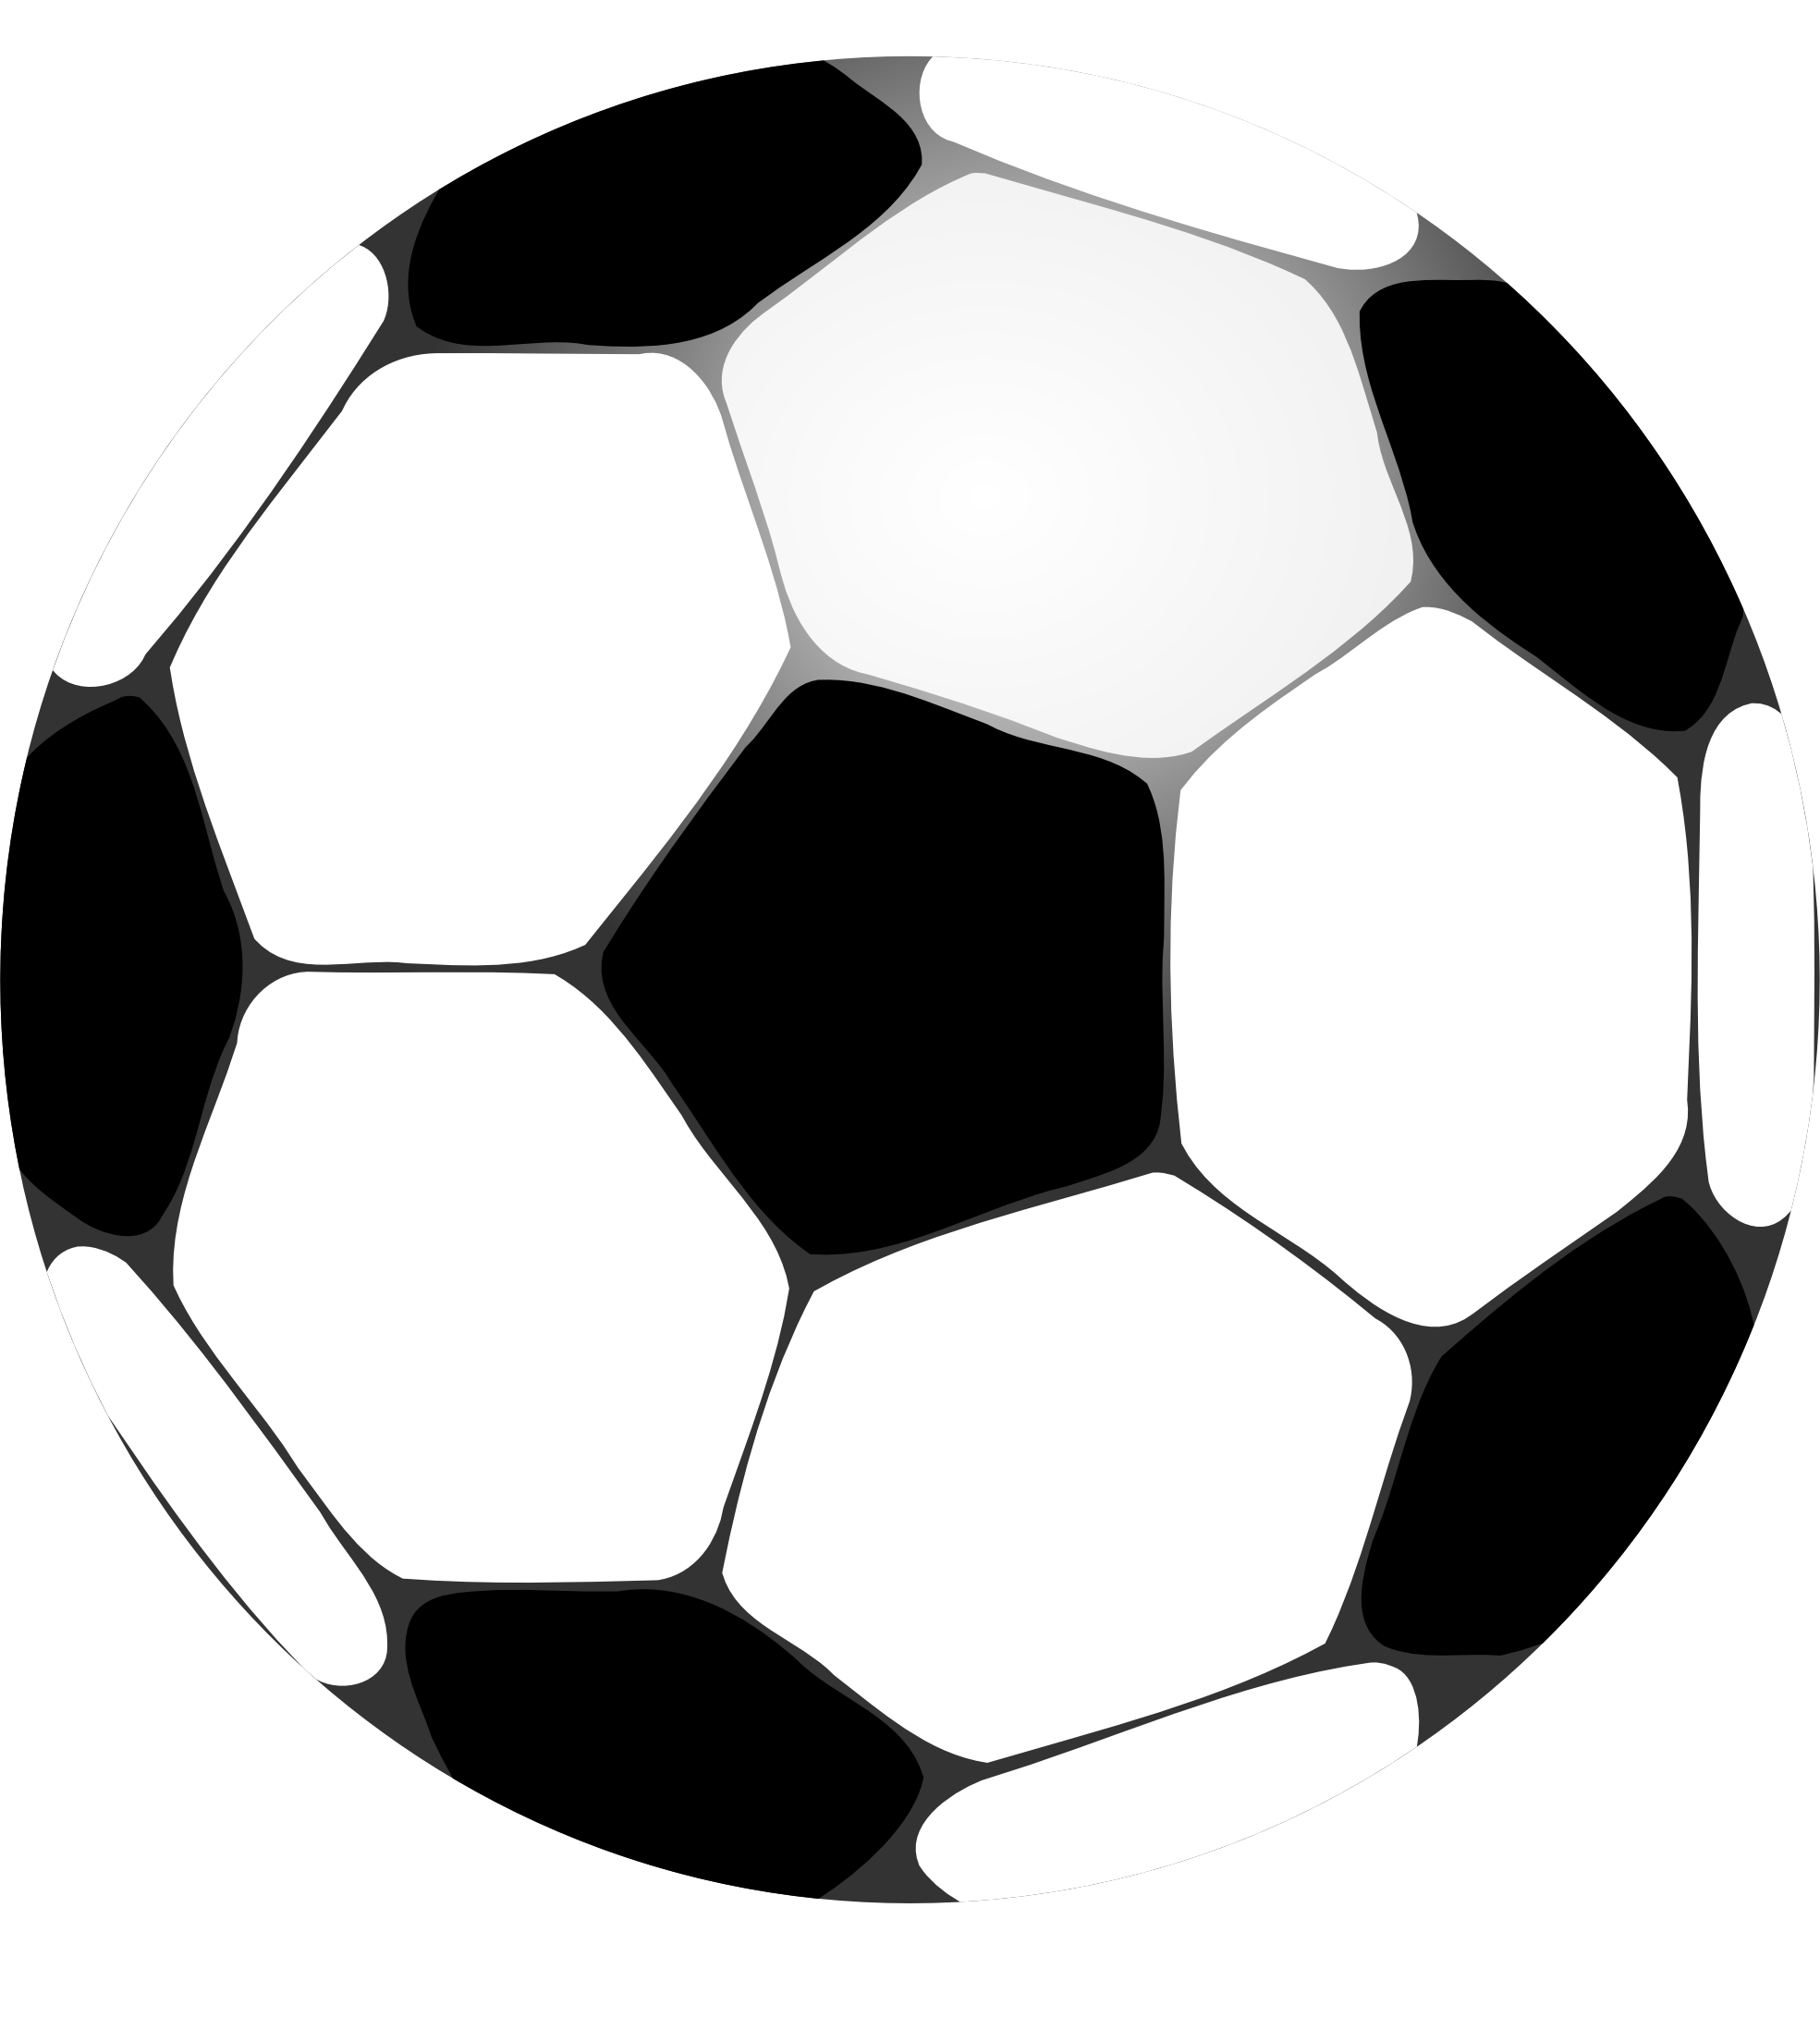 Football images clipart